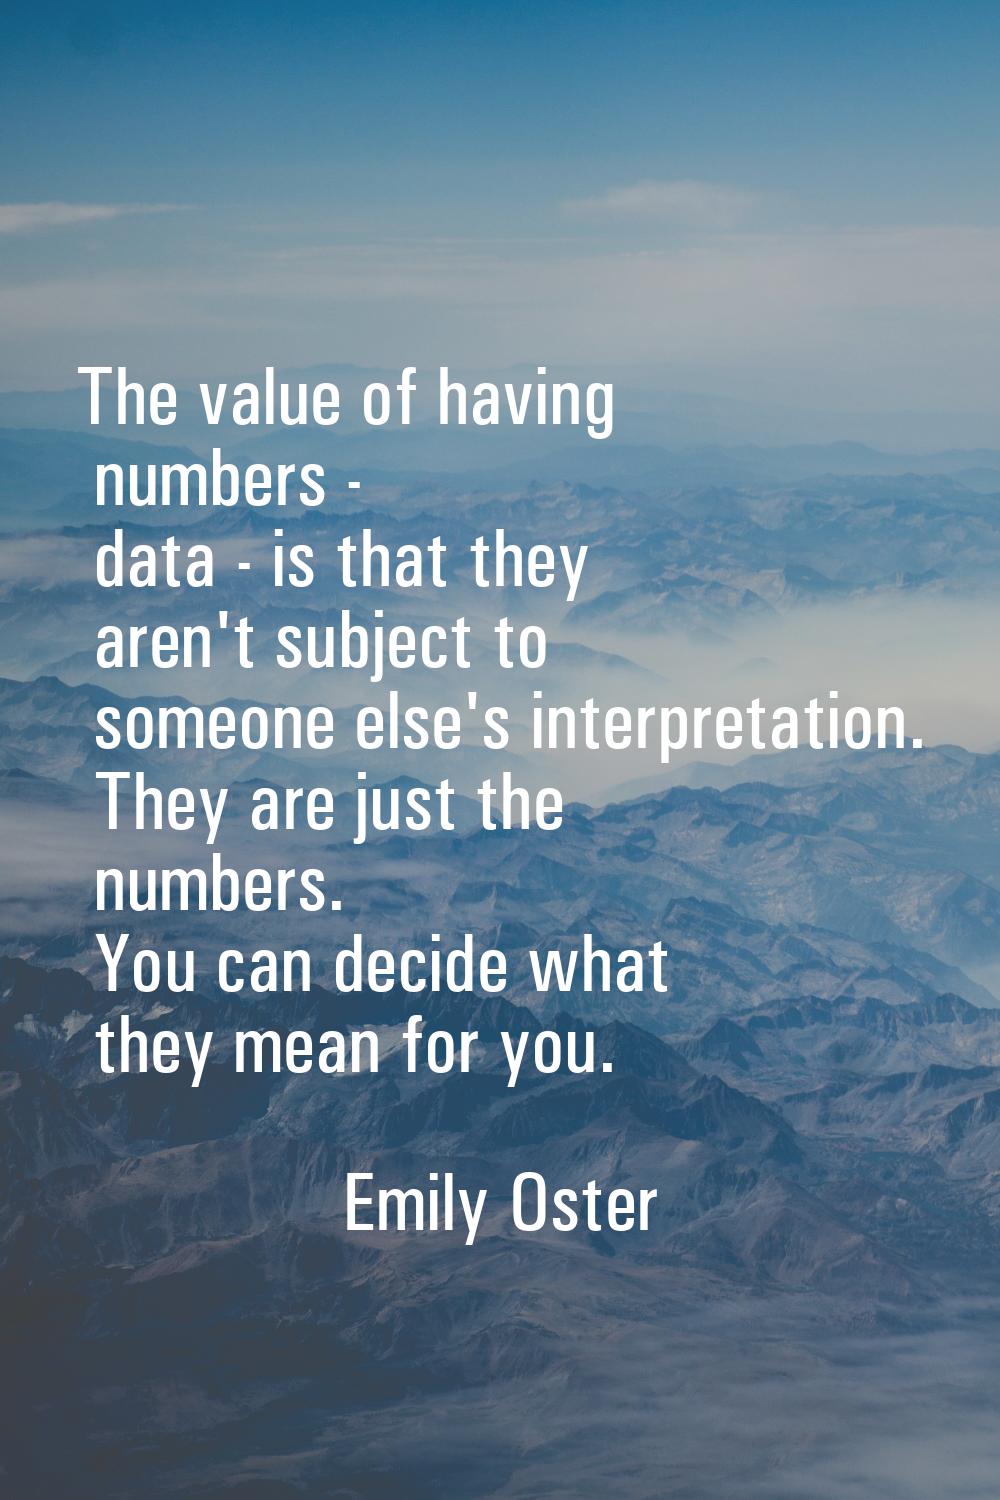 The value of having numbers - data - is that they aren't subject to someone else's interpretation. 